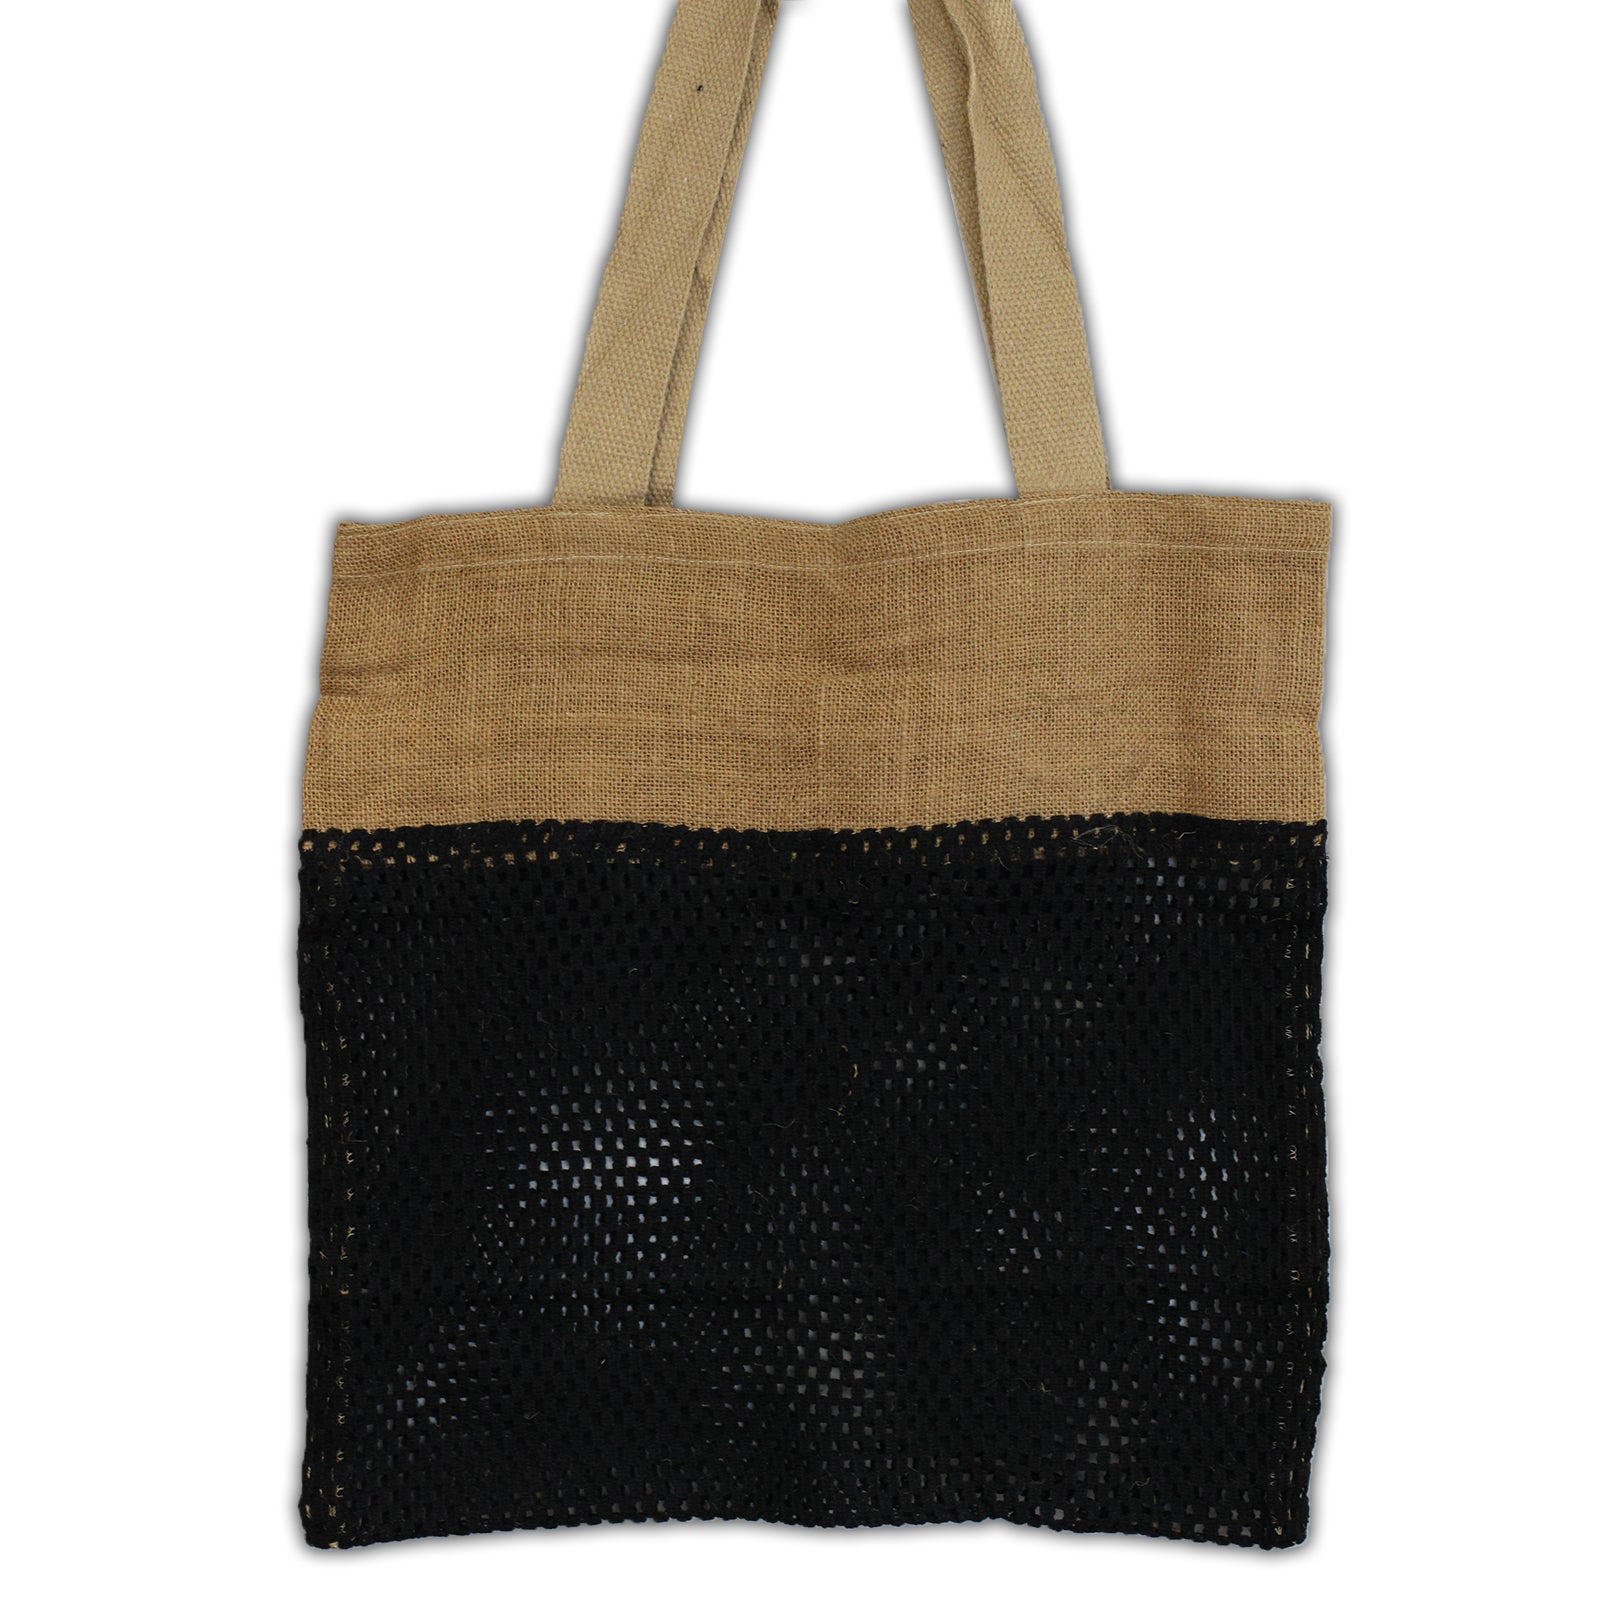 View Pure Soft Jute and Cotton Mesh Bag Black information